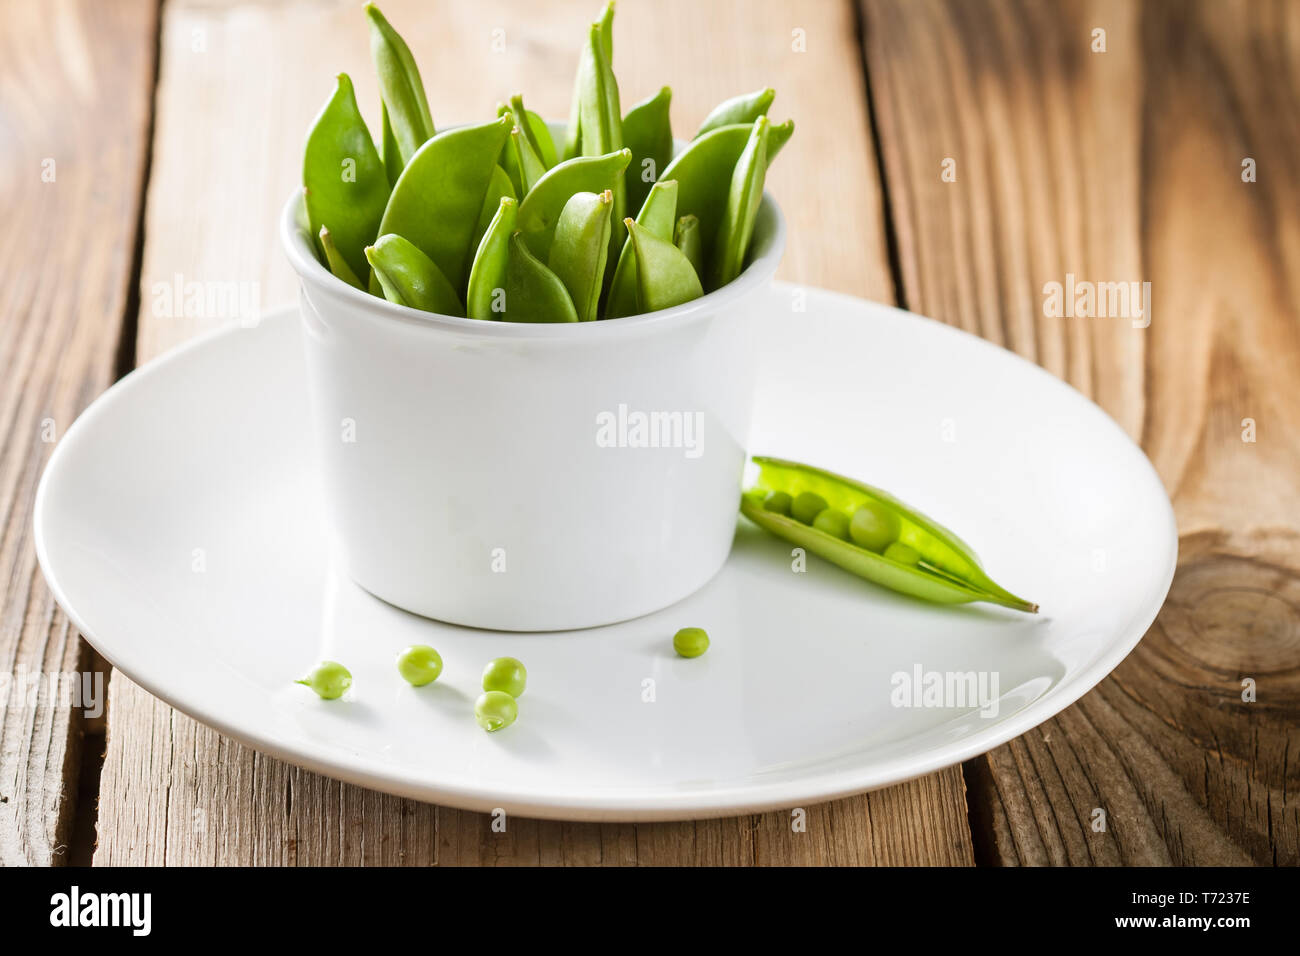 Green peas in a pods Stock Photo